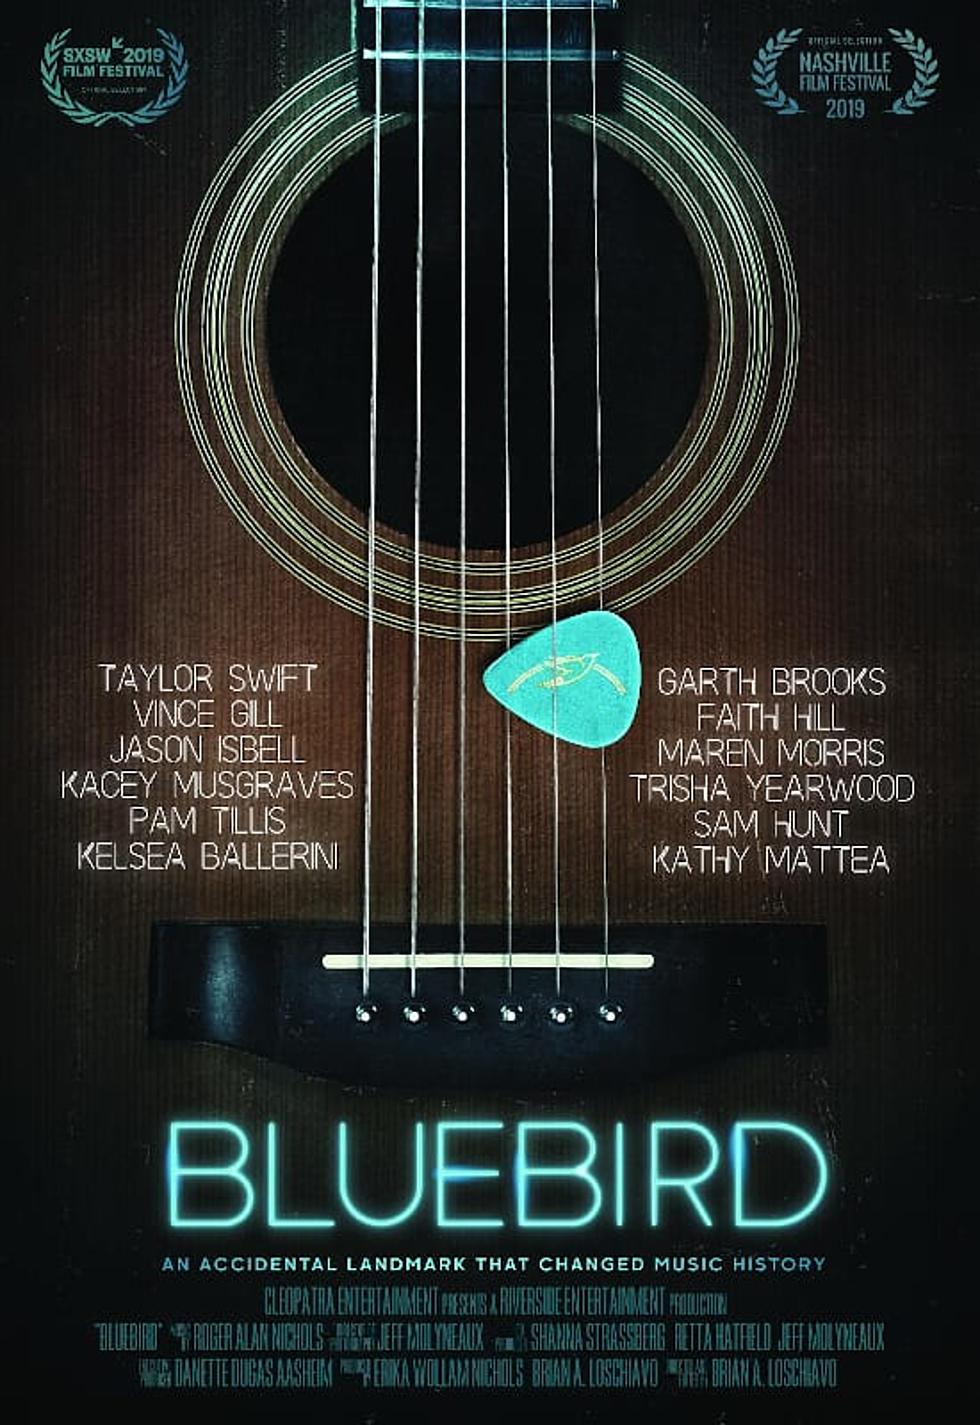 Score Passes to a Special Screening of ‘Bluebird’ at the Ridgefield Playhouse